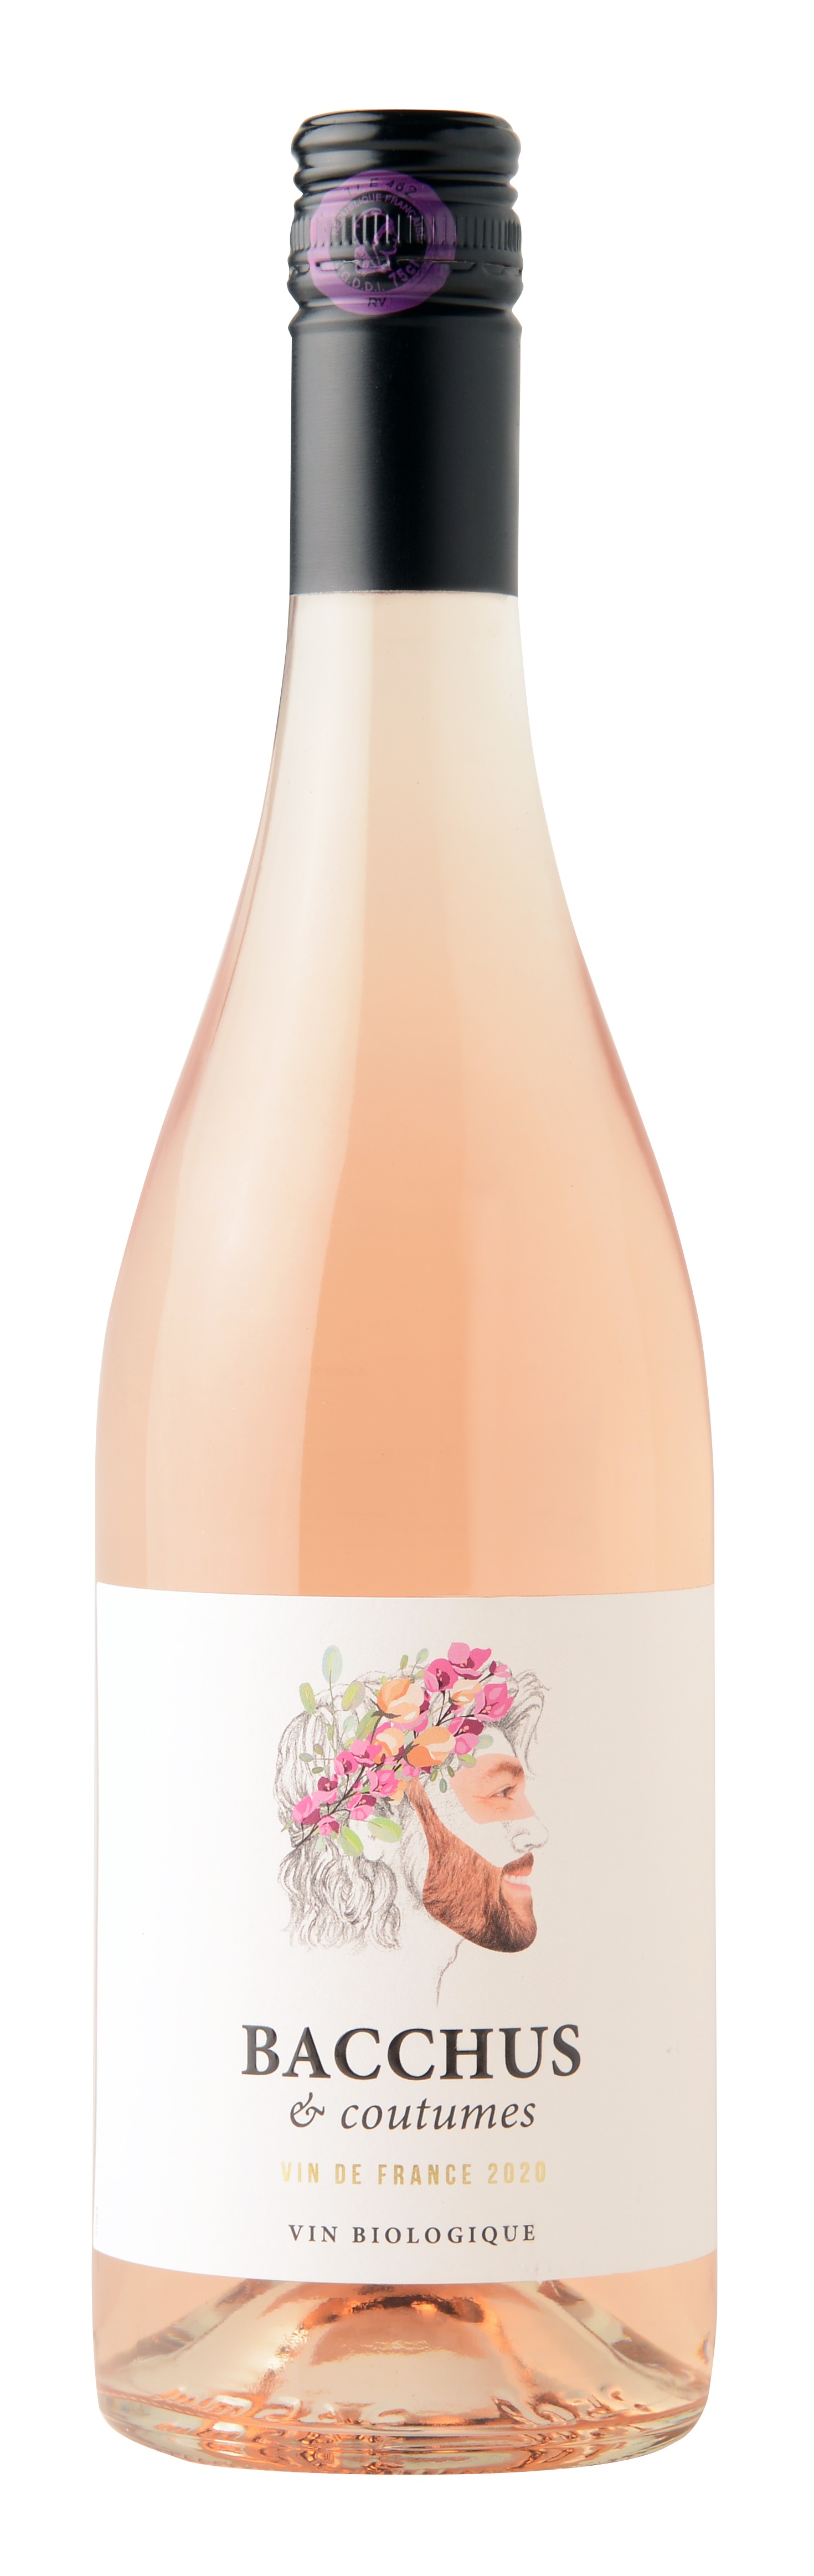 76732 Bacchus & Coutumes rose 2020 1x0,75ltr